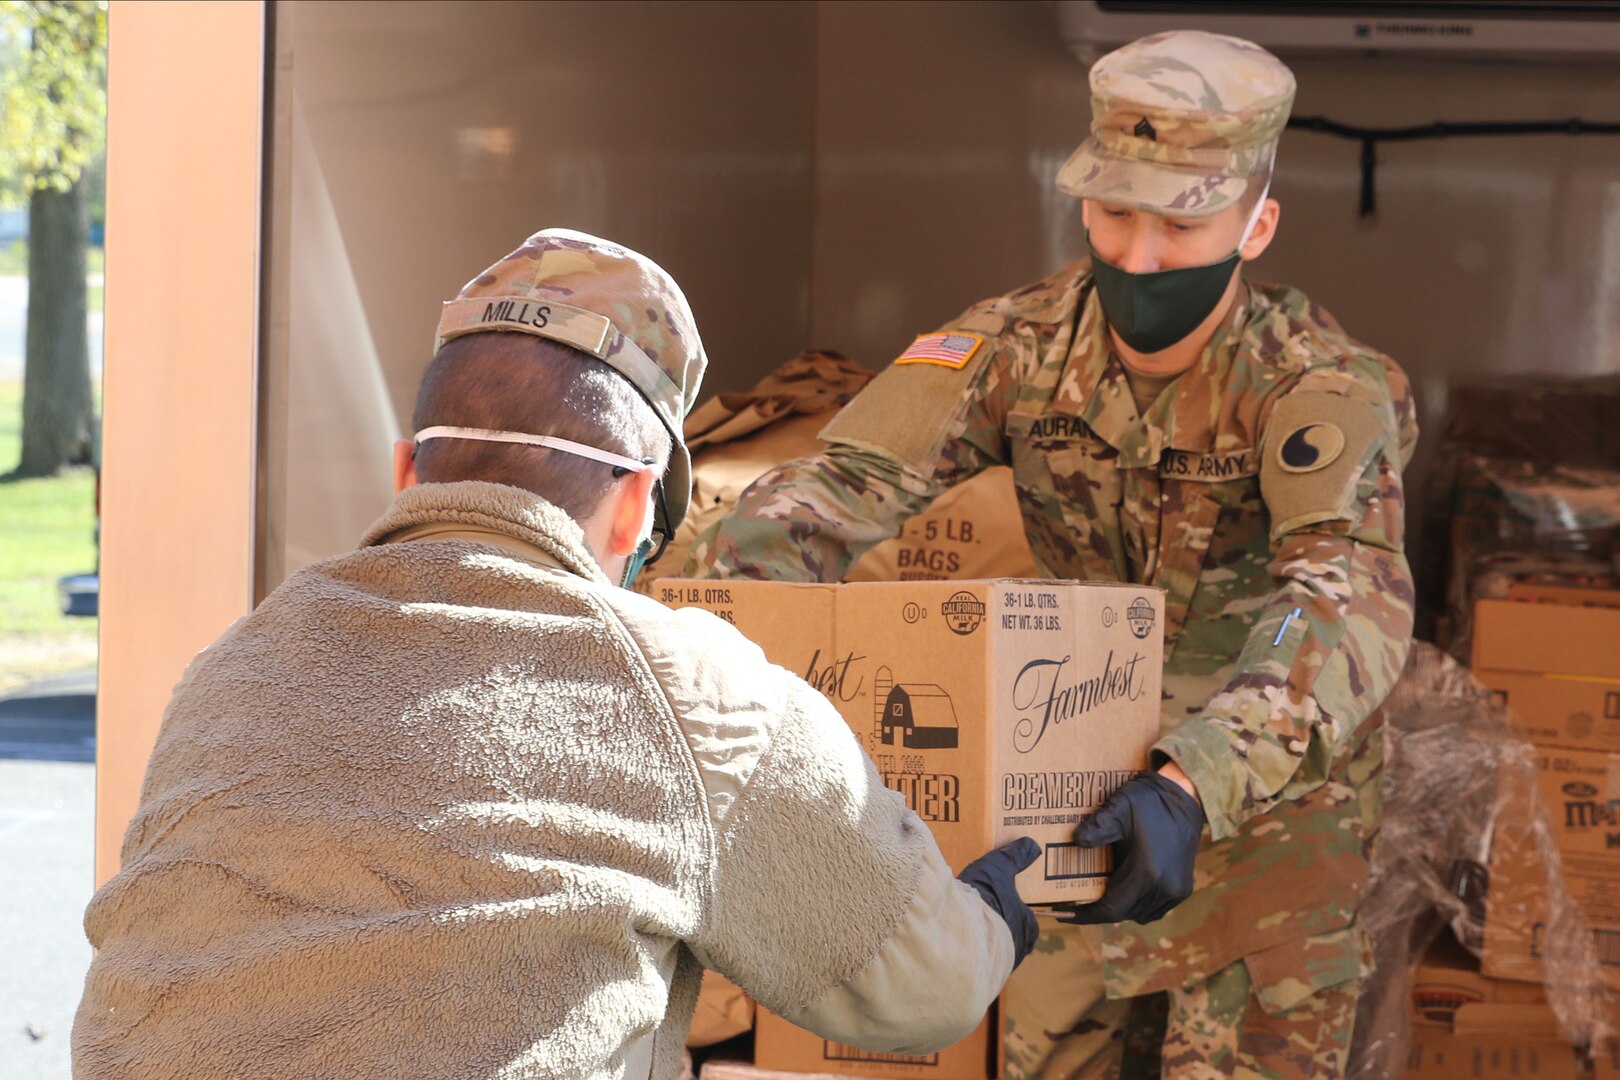 Virginia National Guard Soldiers assigned to the Fredericksburg-based 229th Brigade Engineer Battalion, 116th Infantry Brigade Combat Team, help deliver food from the Fredericksburg Regional Food Bank to the food pantry at Massaponax Baptist Church April 22, 2020, in Fredericksburg, Virginia.